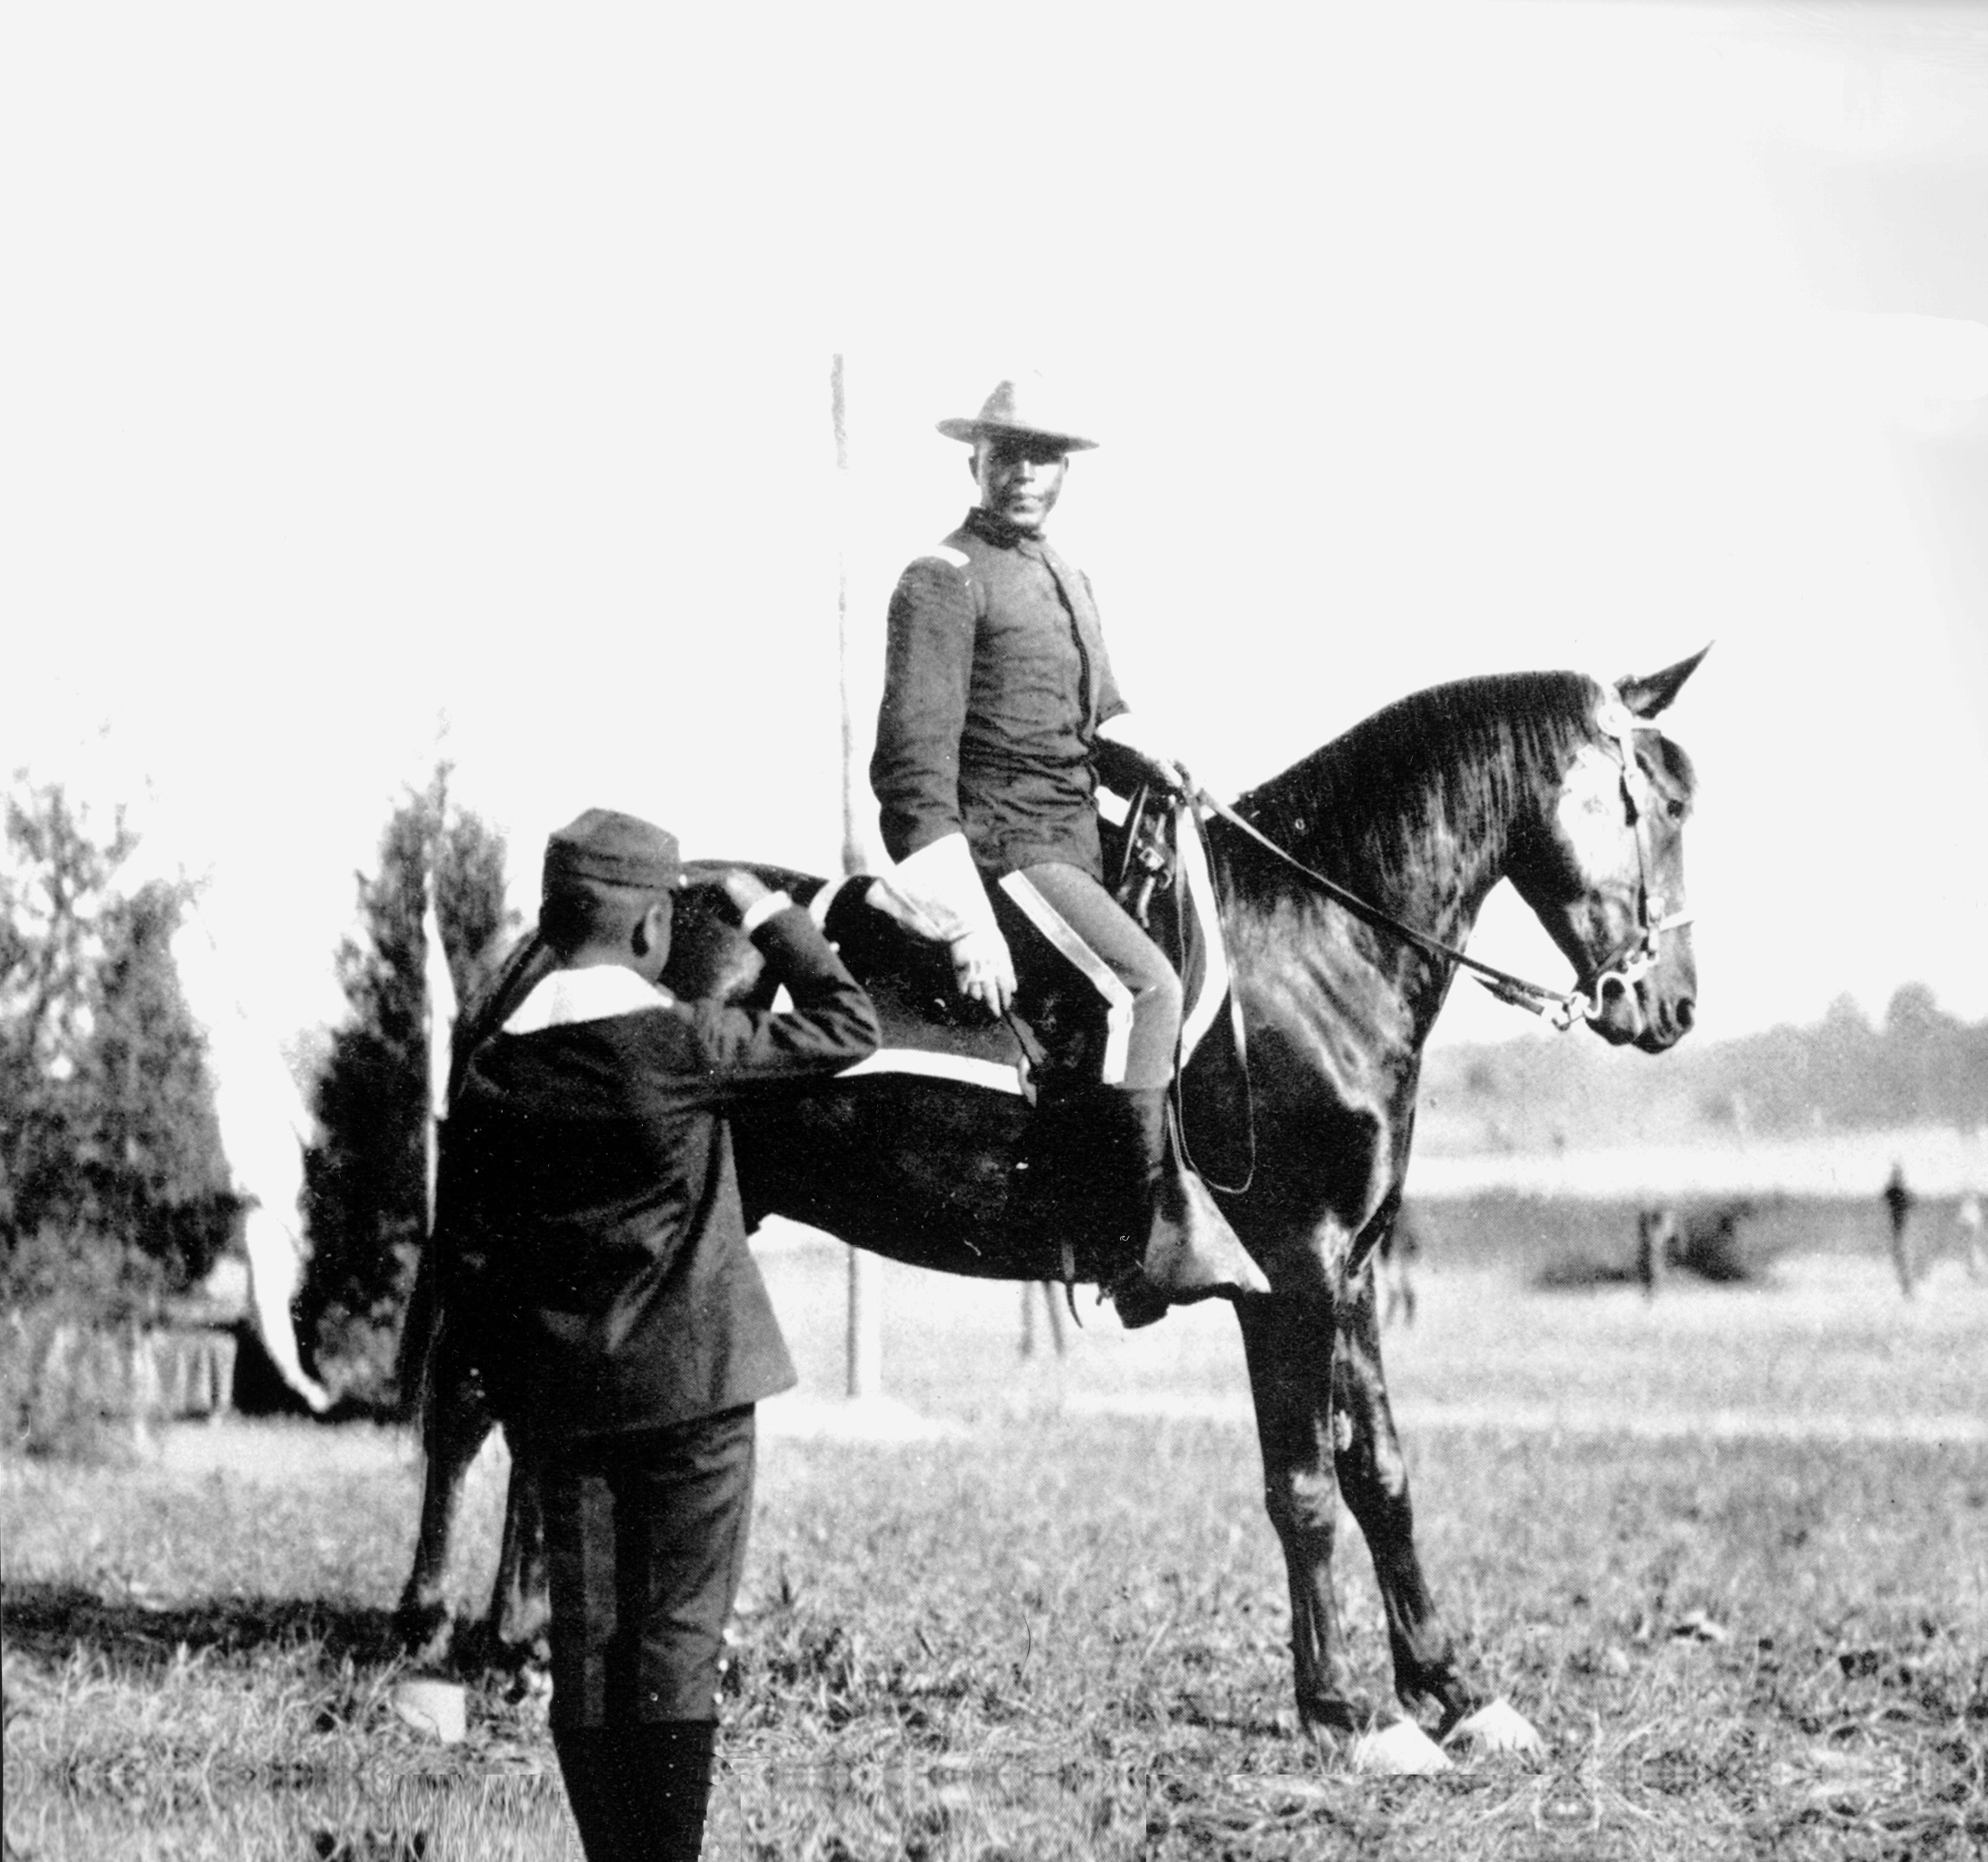 An African American man in a military uniform sitting high on a horse being saluted by a boy